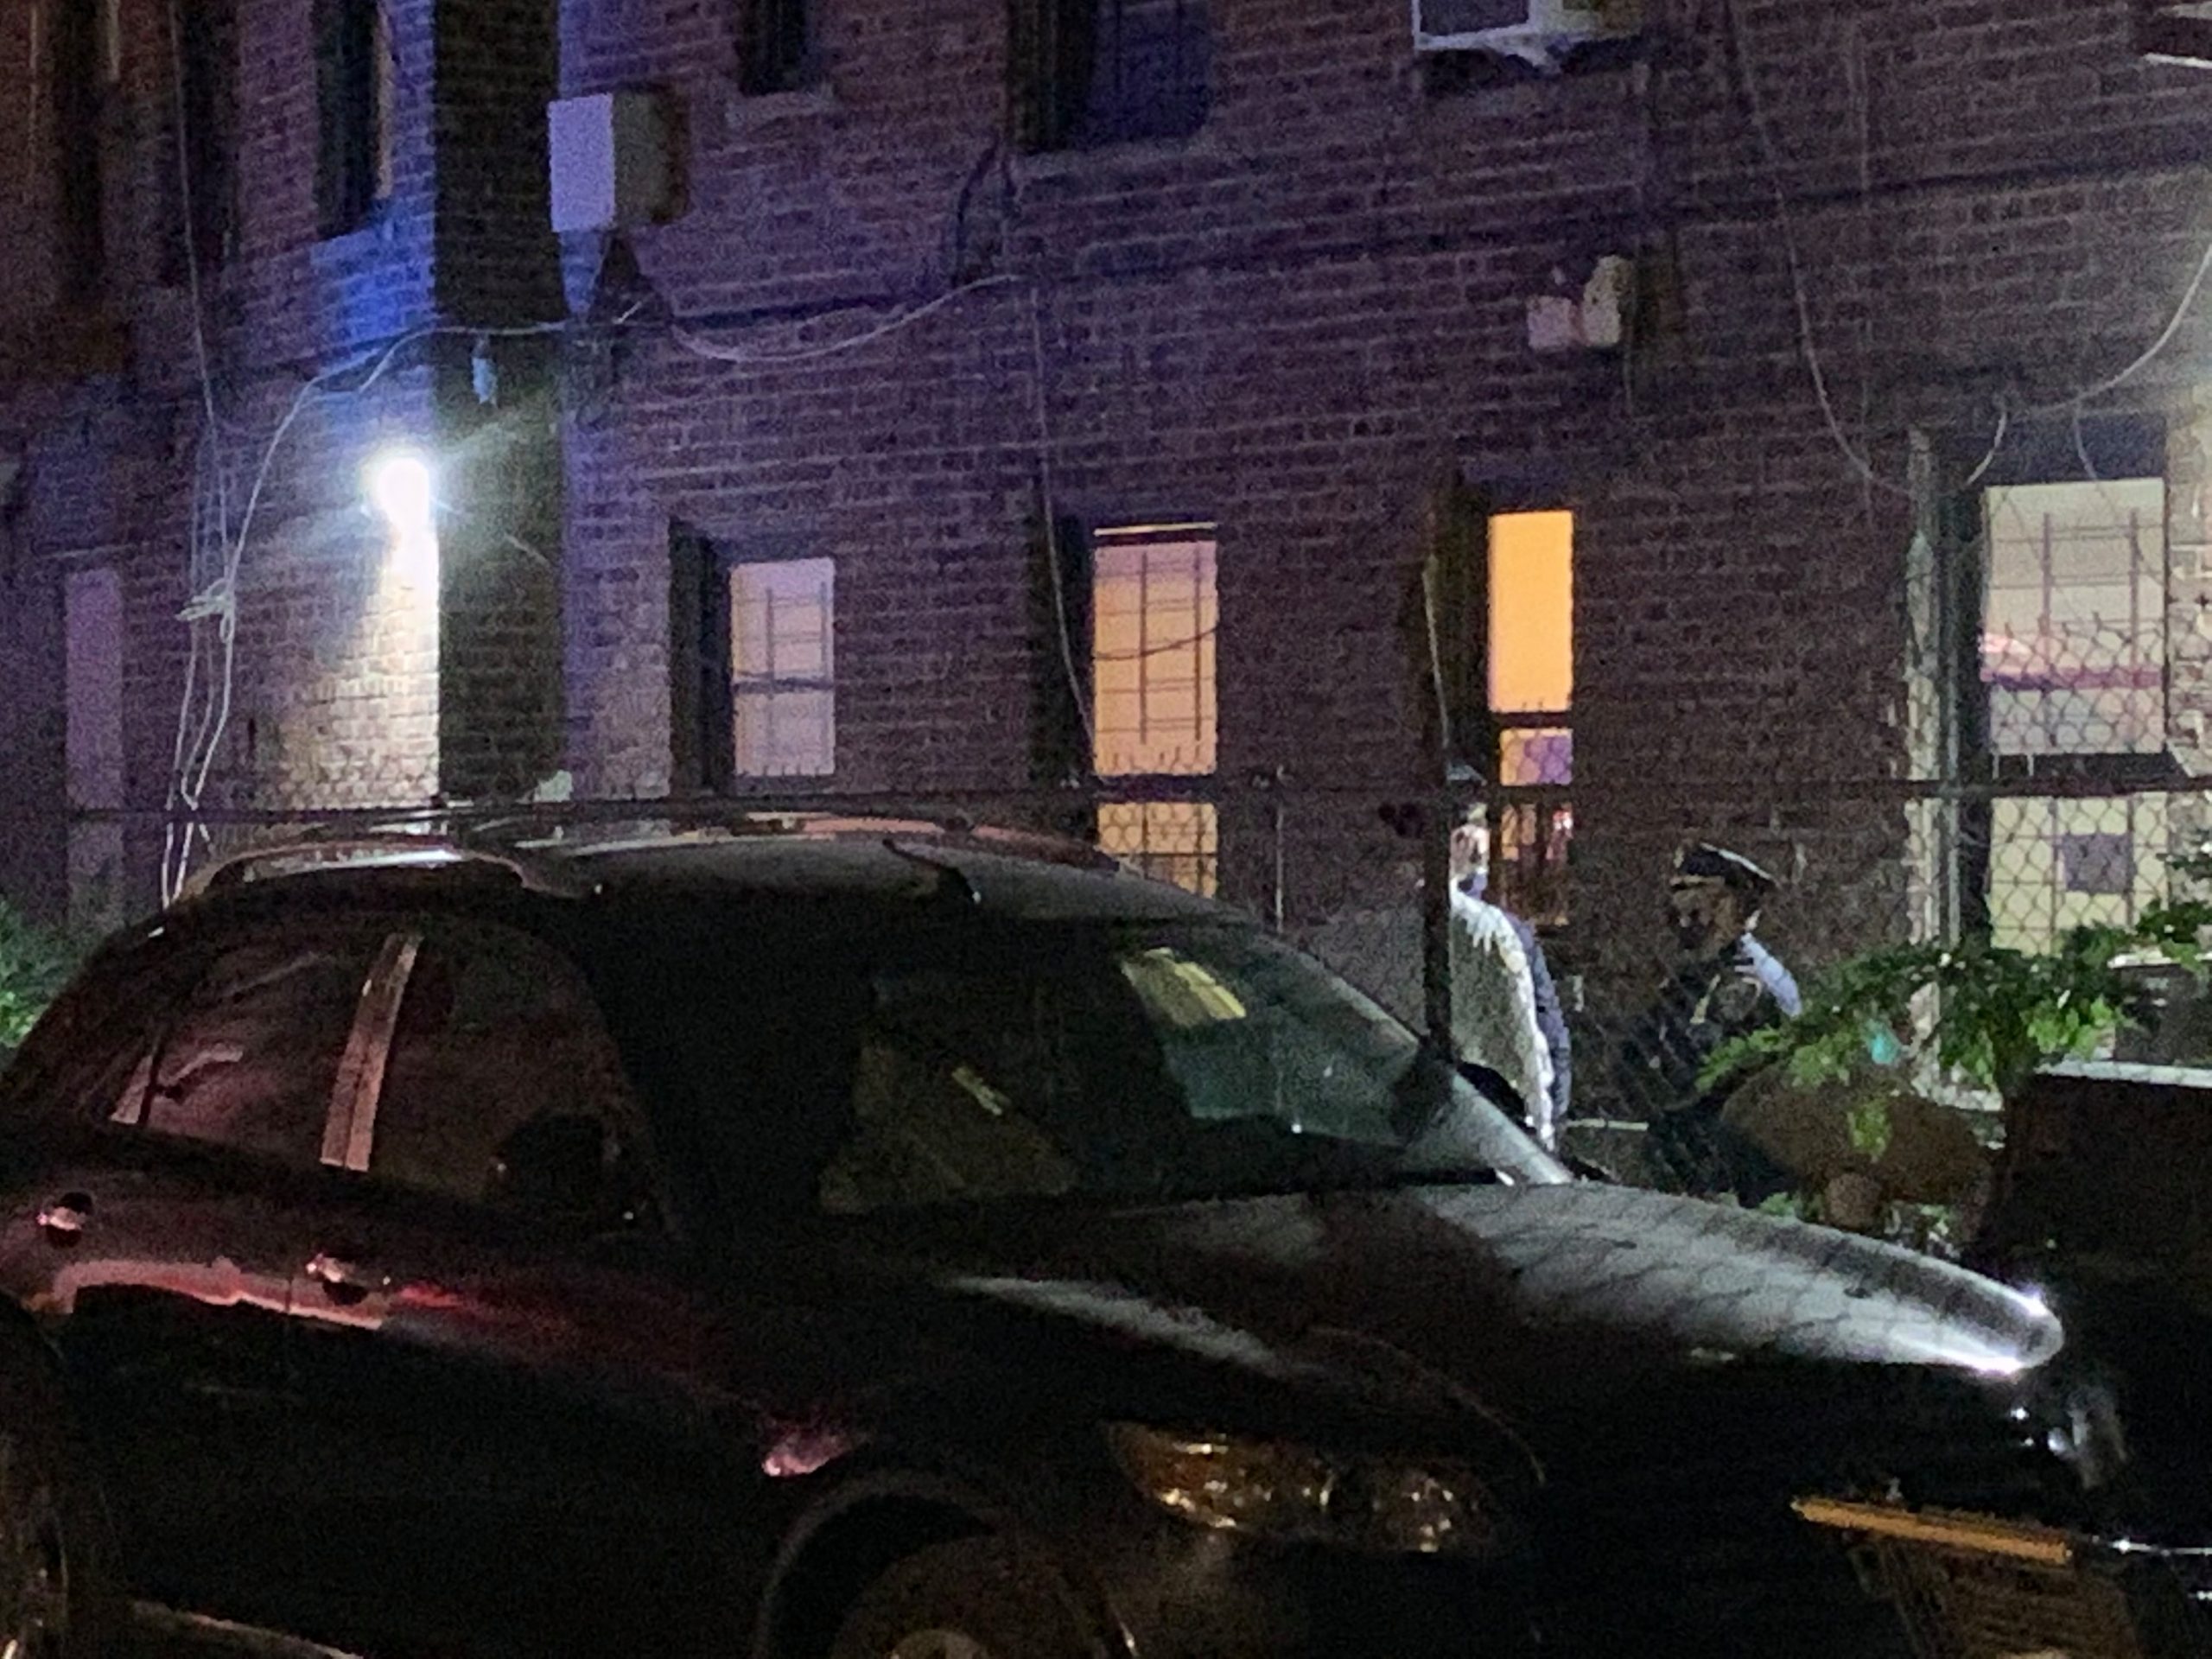 The bodies of two infants were found wrapped in paper behind a Bronx residential building